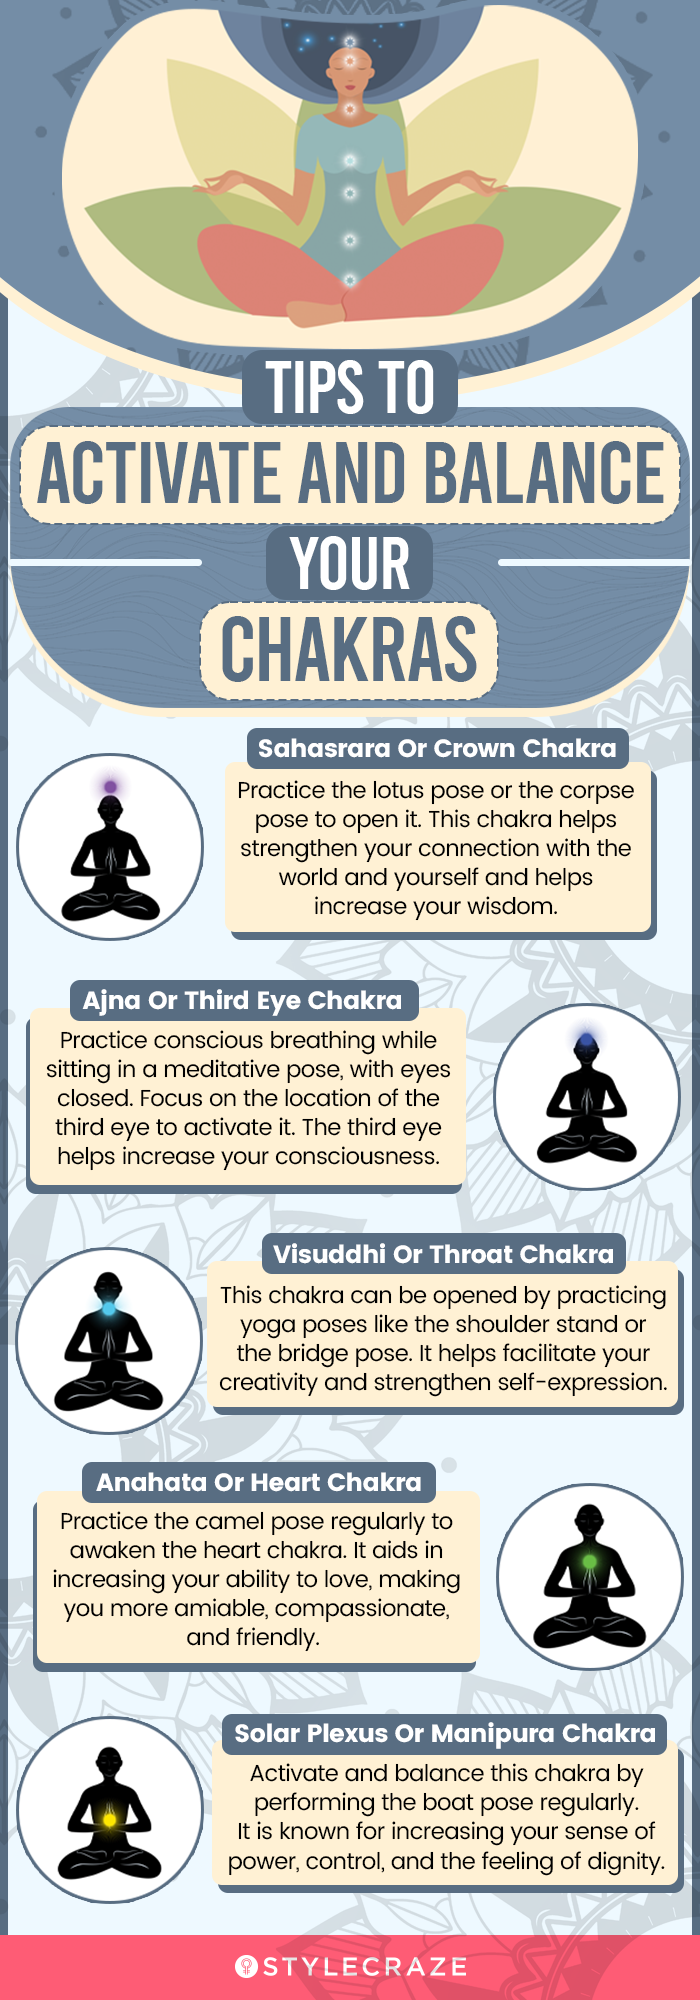 tips to activate and balance your chakras (infographic)